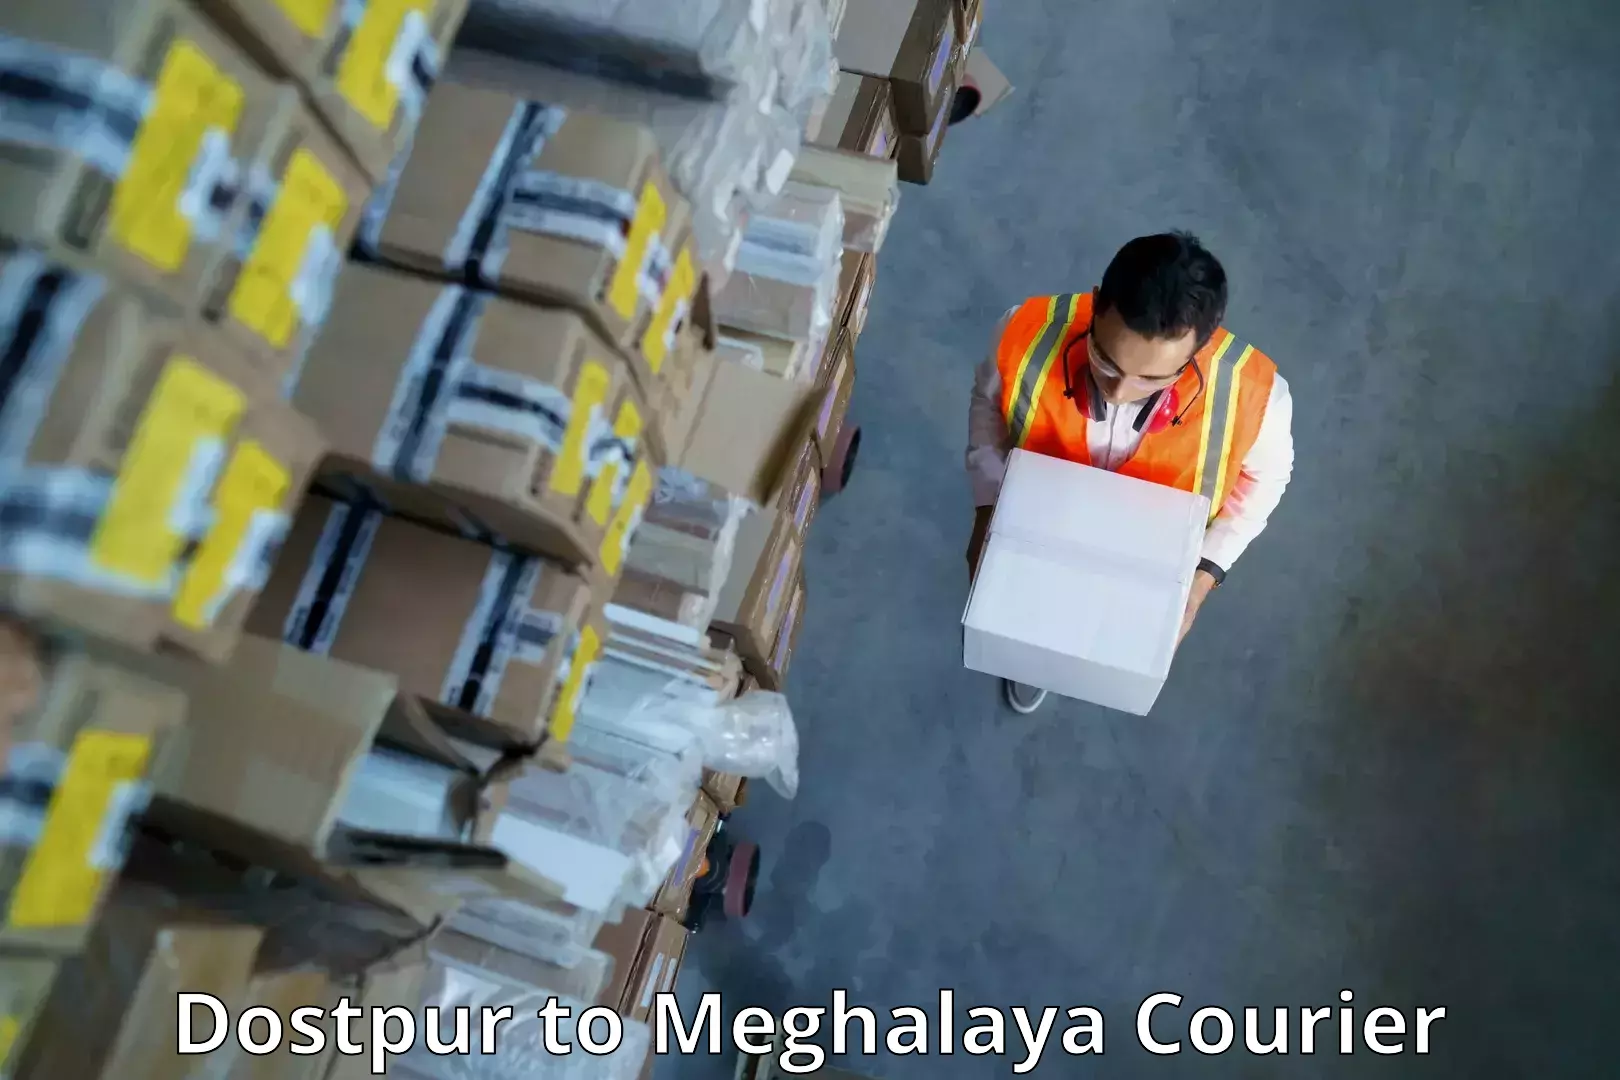 Courier service innovation Dostpur to South Garo Hills